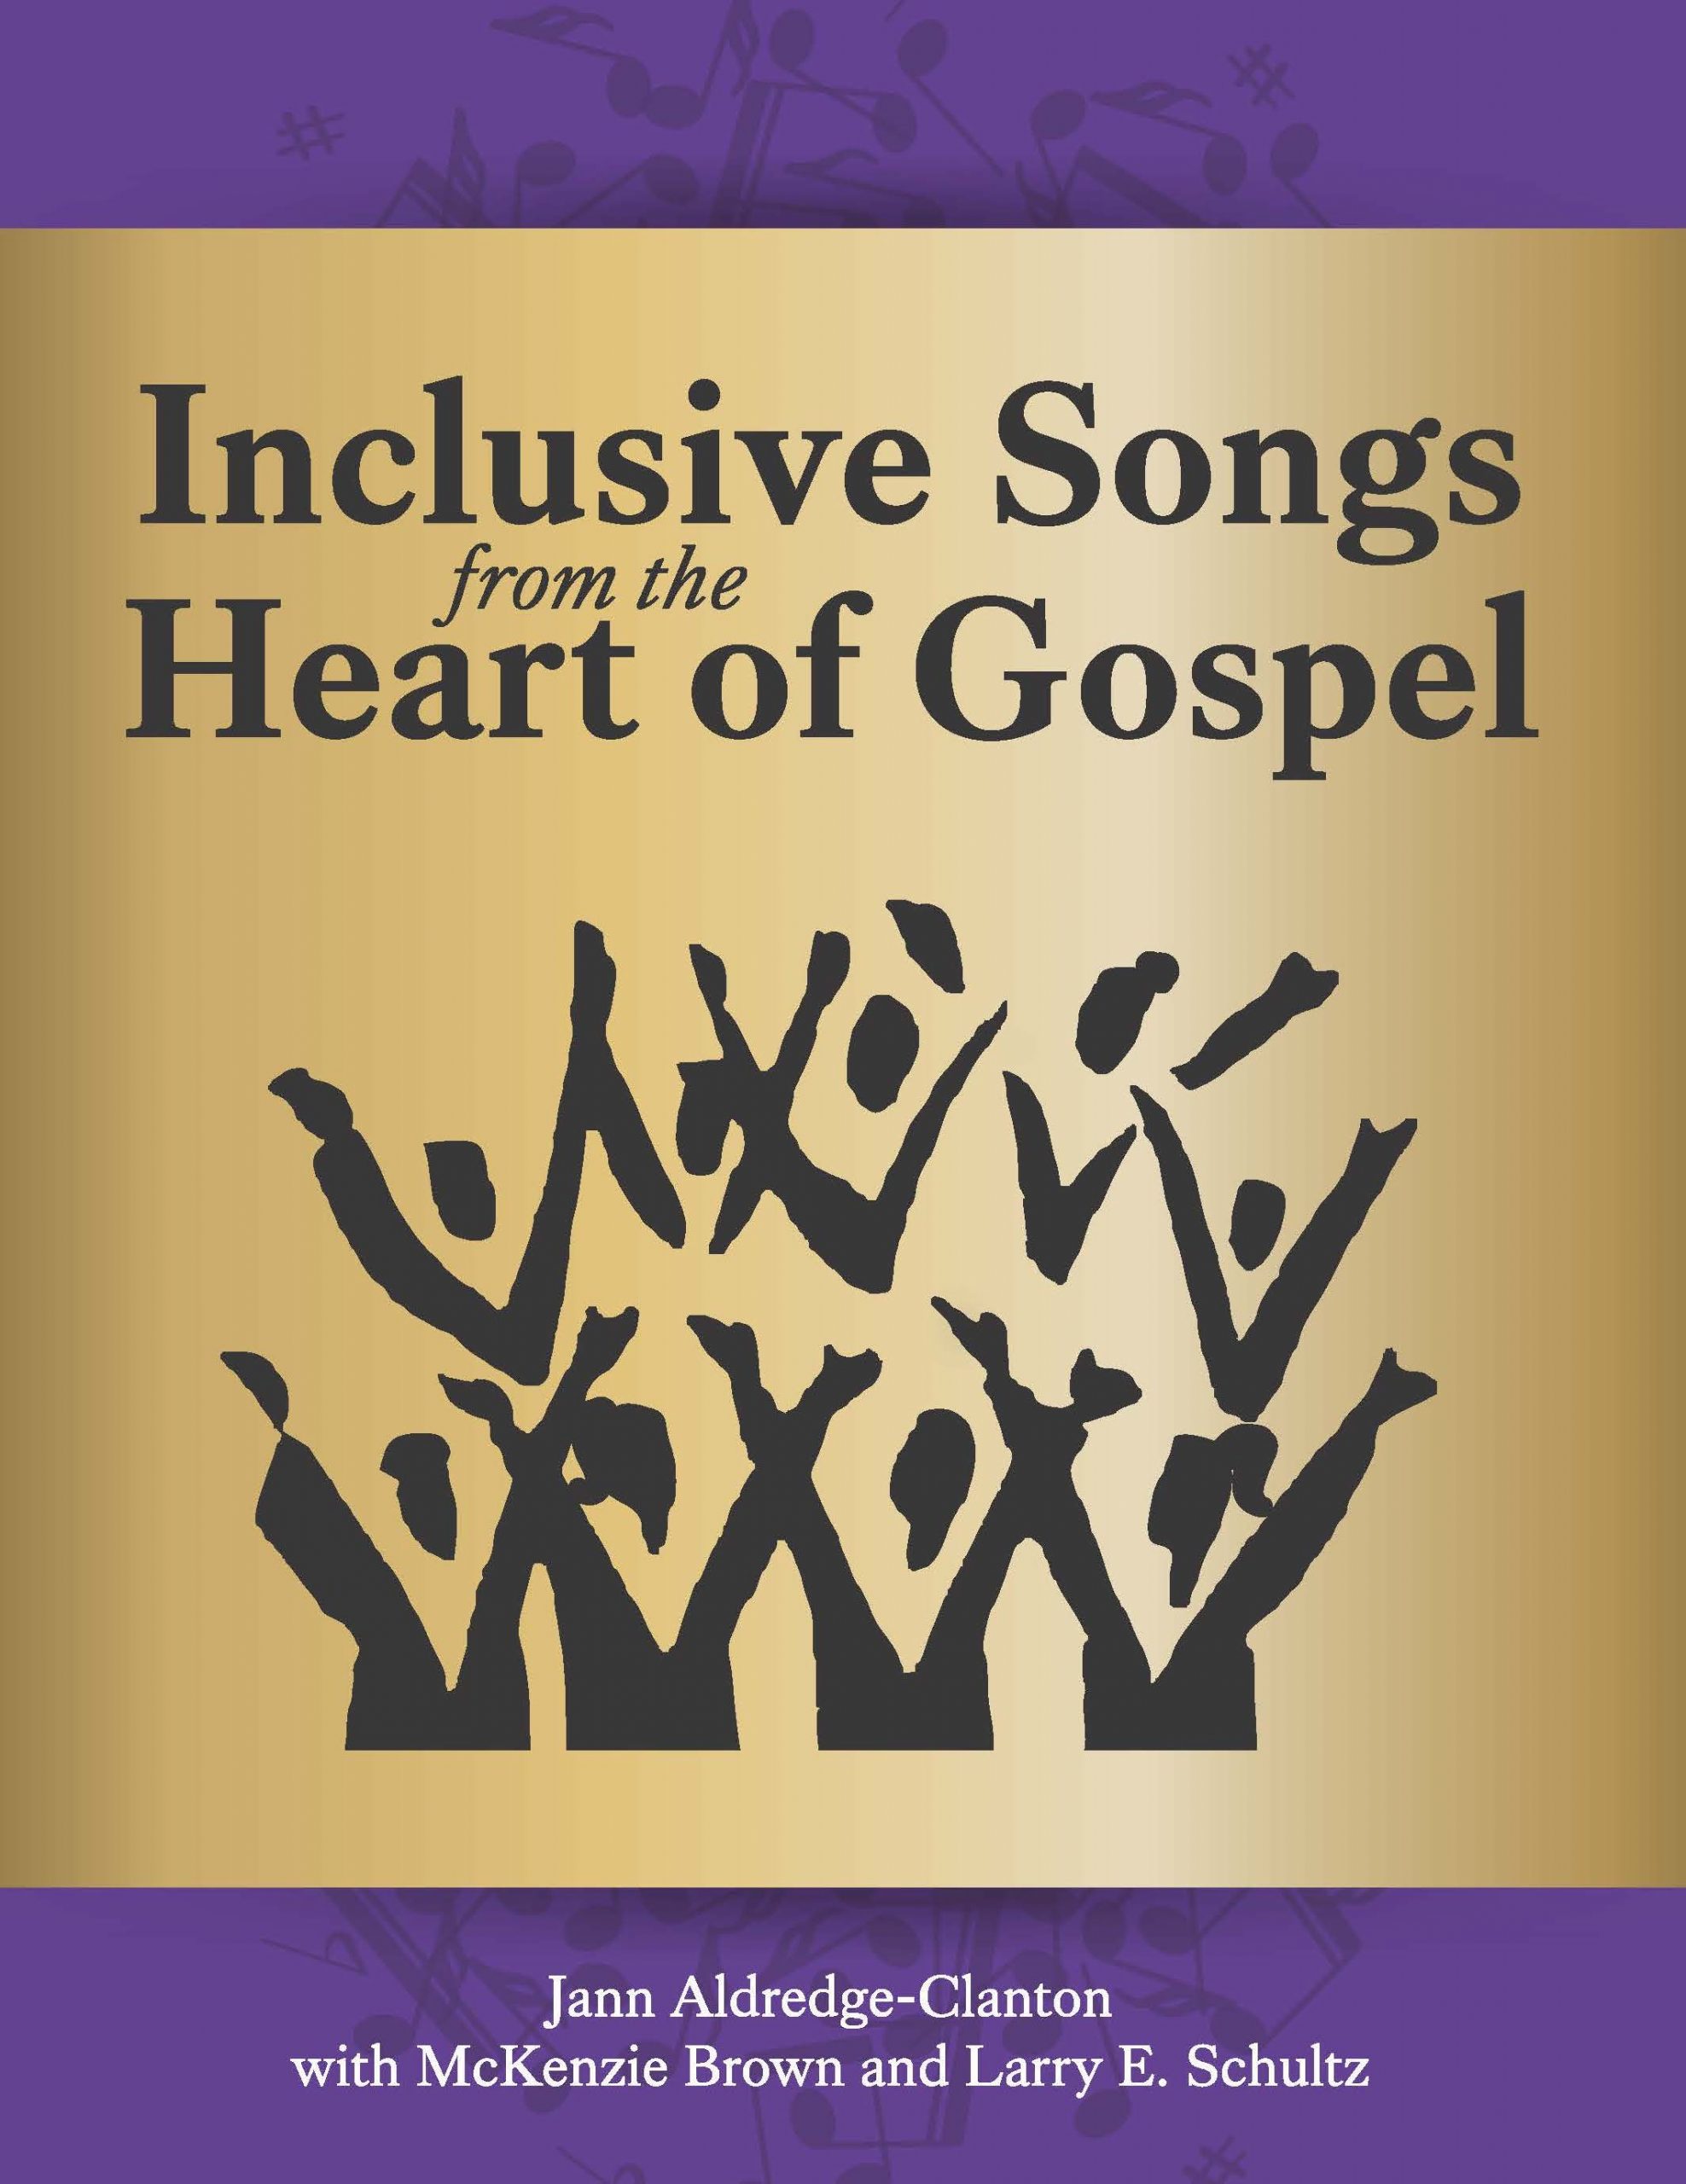 Just Released! INCLUSIVE SONGS FROM THE HEART OF GOSPEL